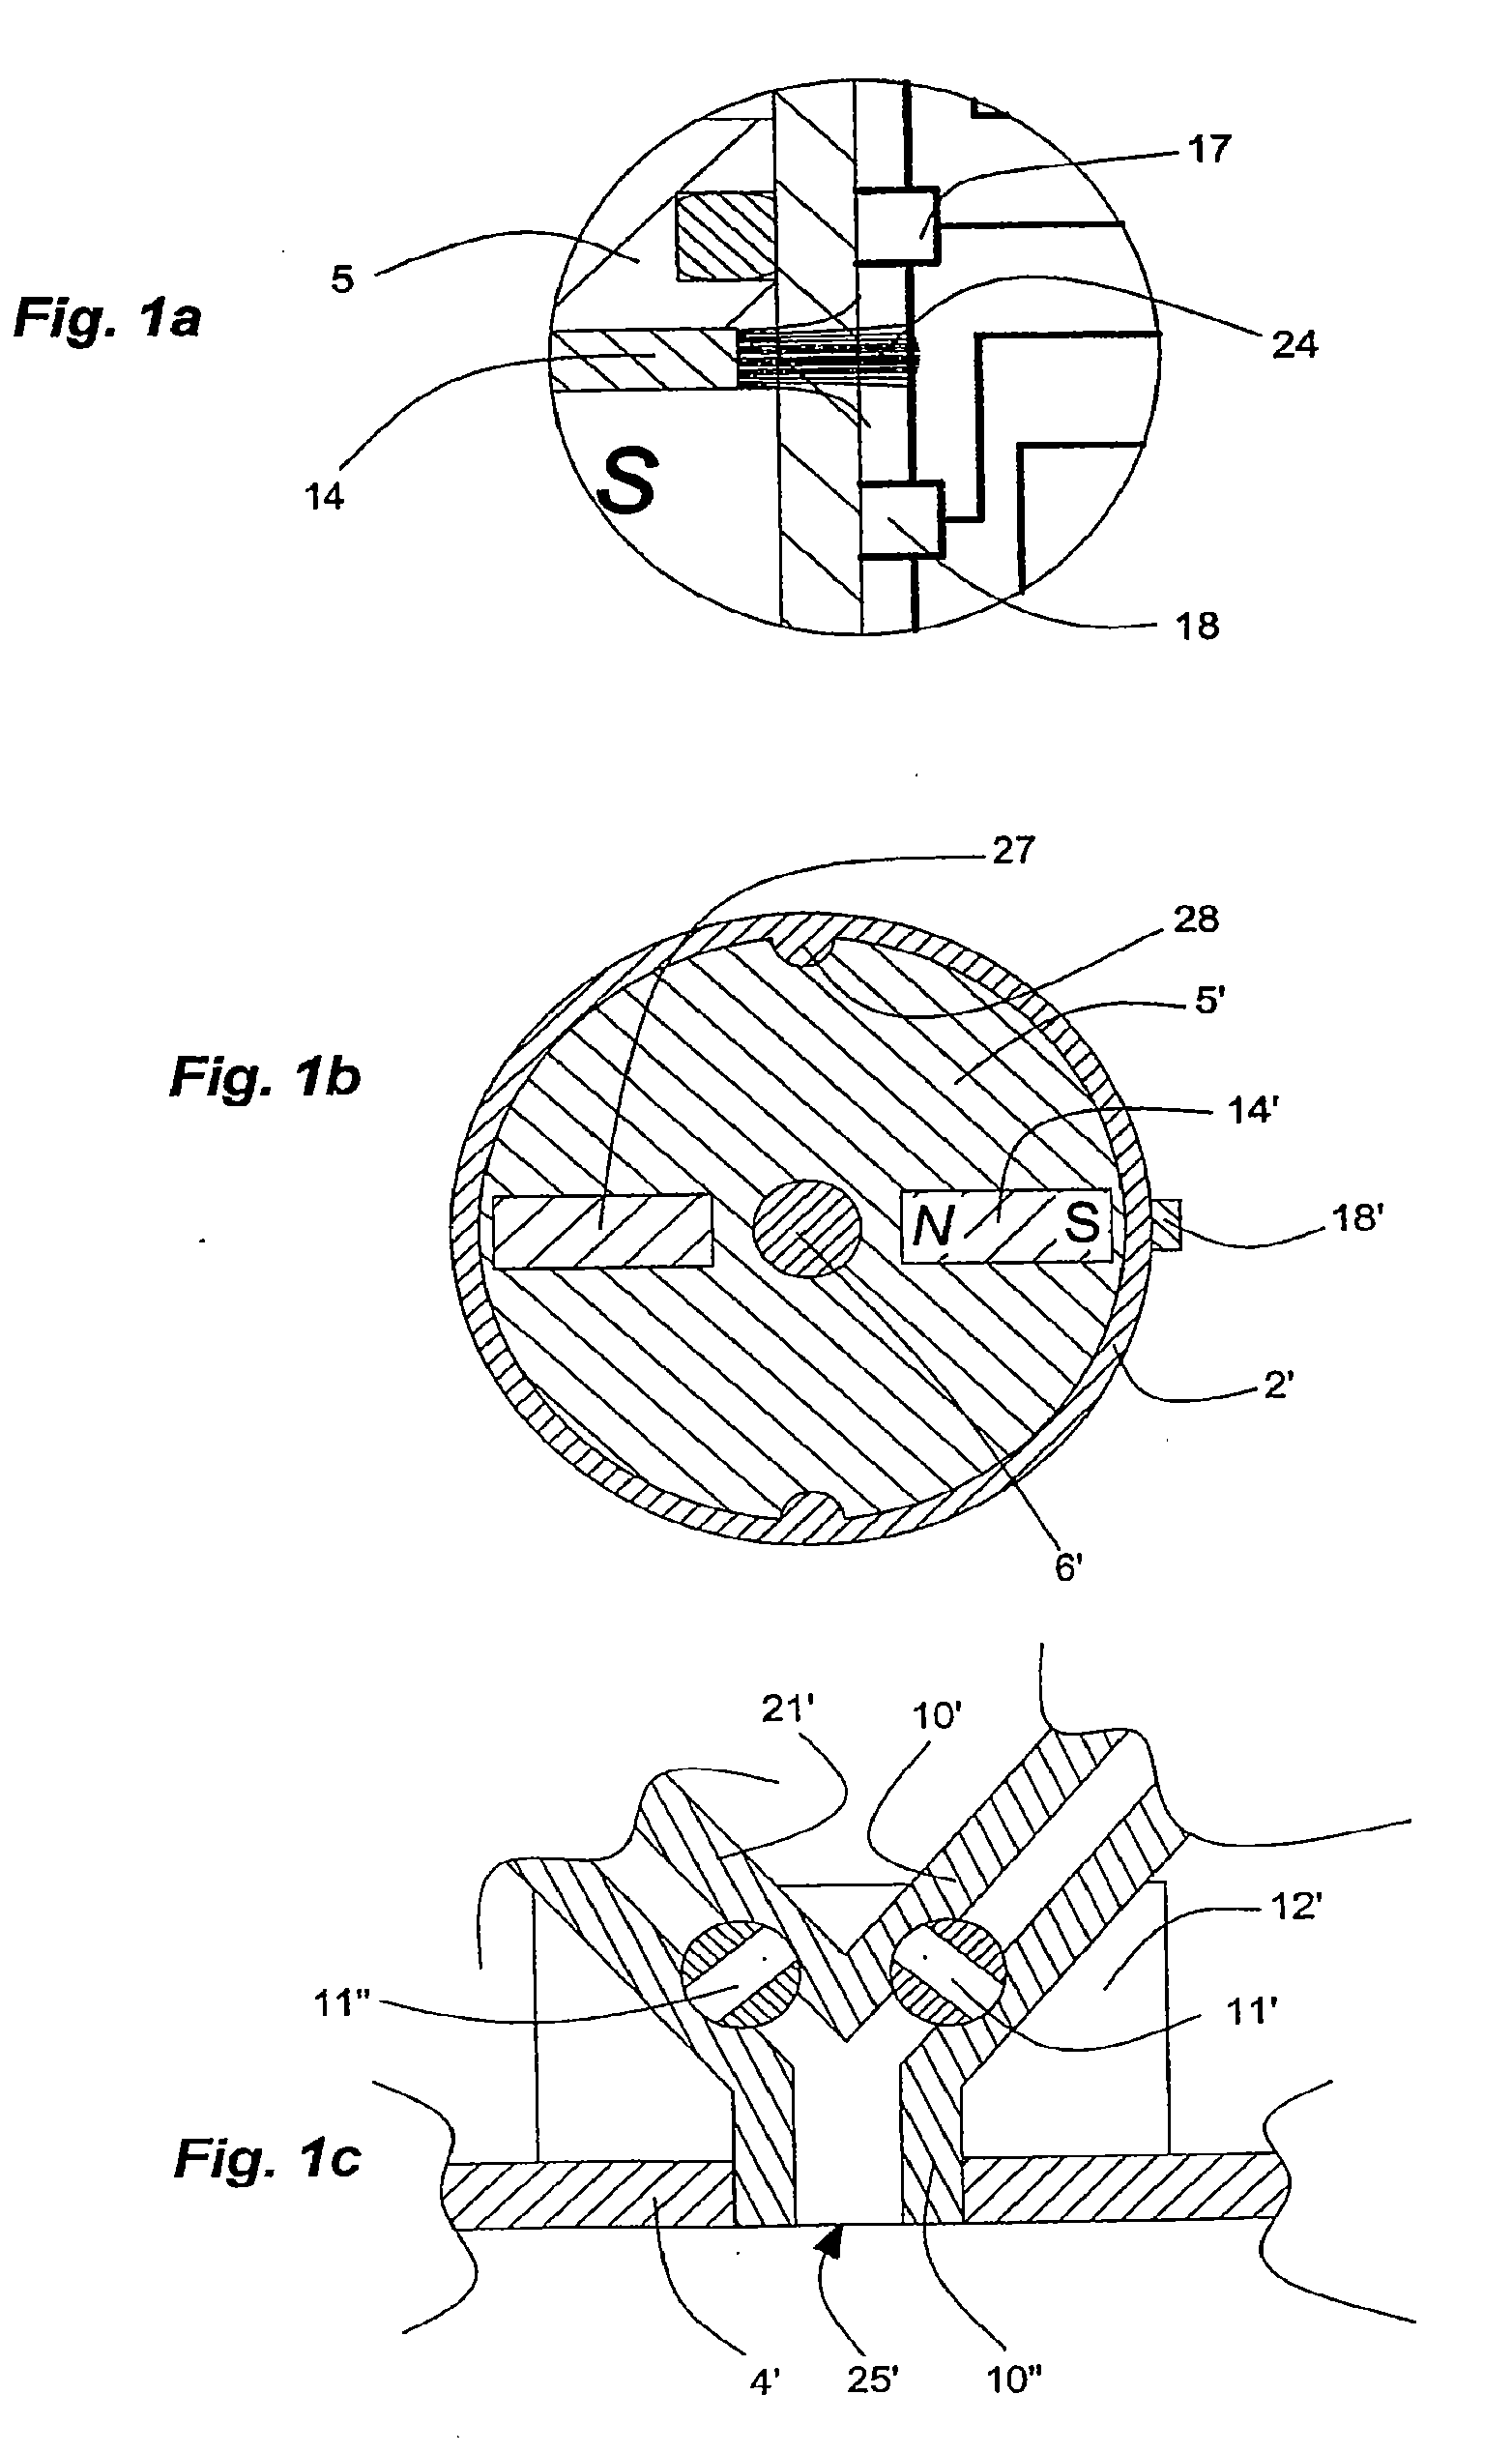 Driving control of a reciprocating cpr apparatus